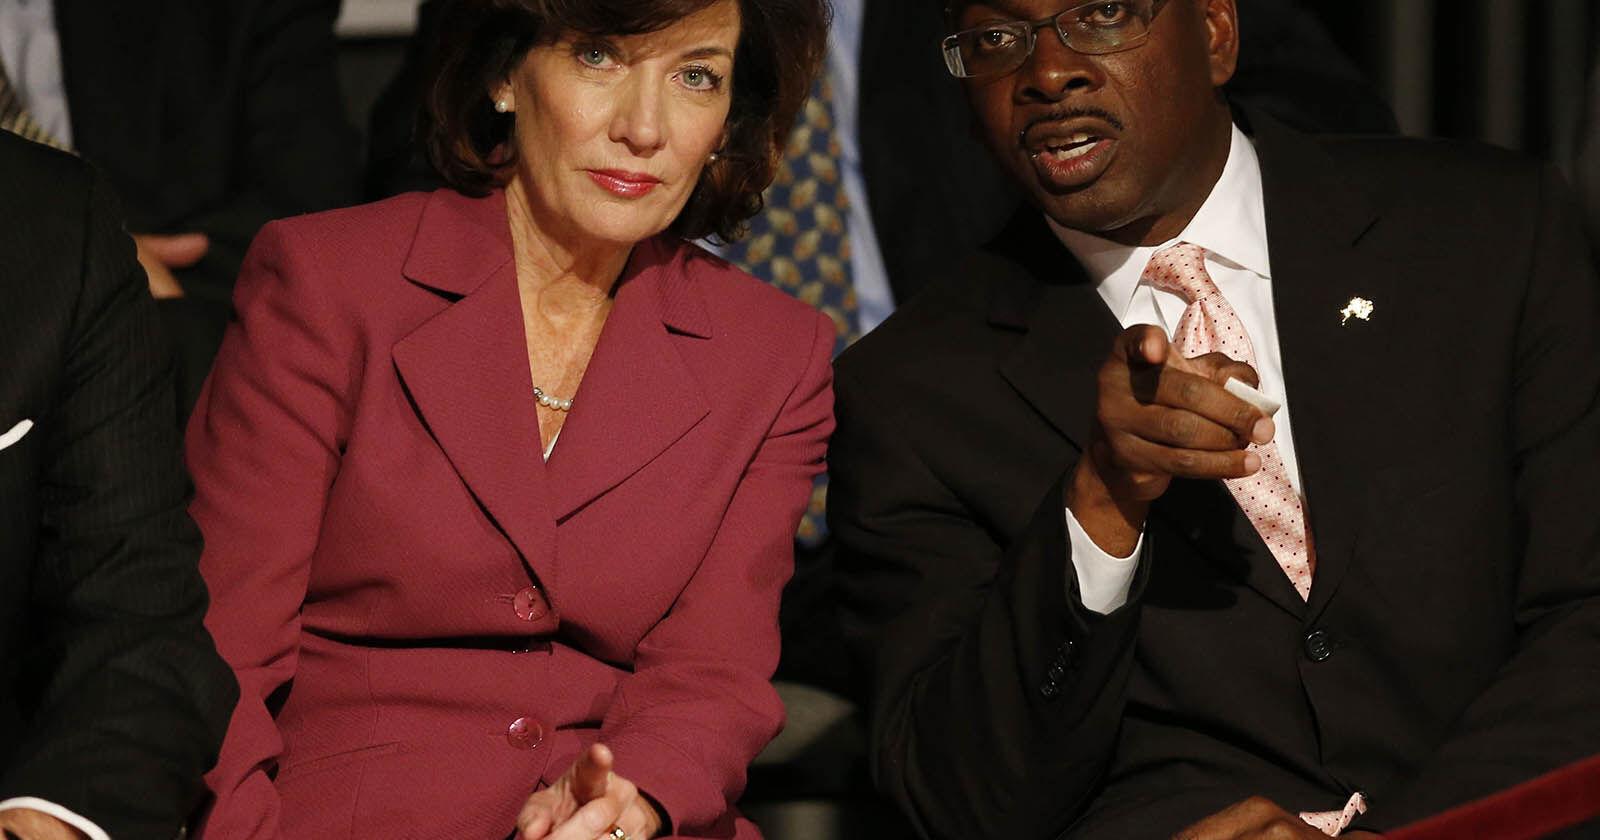 Byron Brown backs Kathy Hochul for governor, despite Tom Suozzi's October support